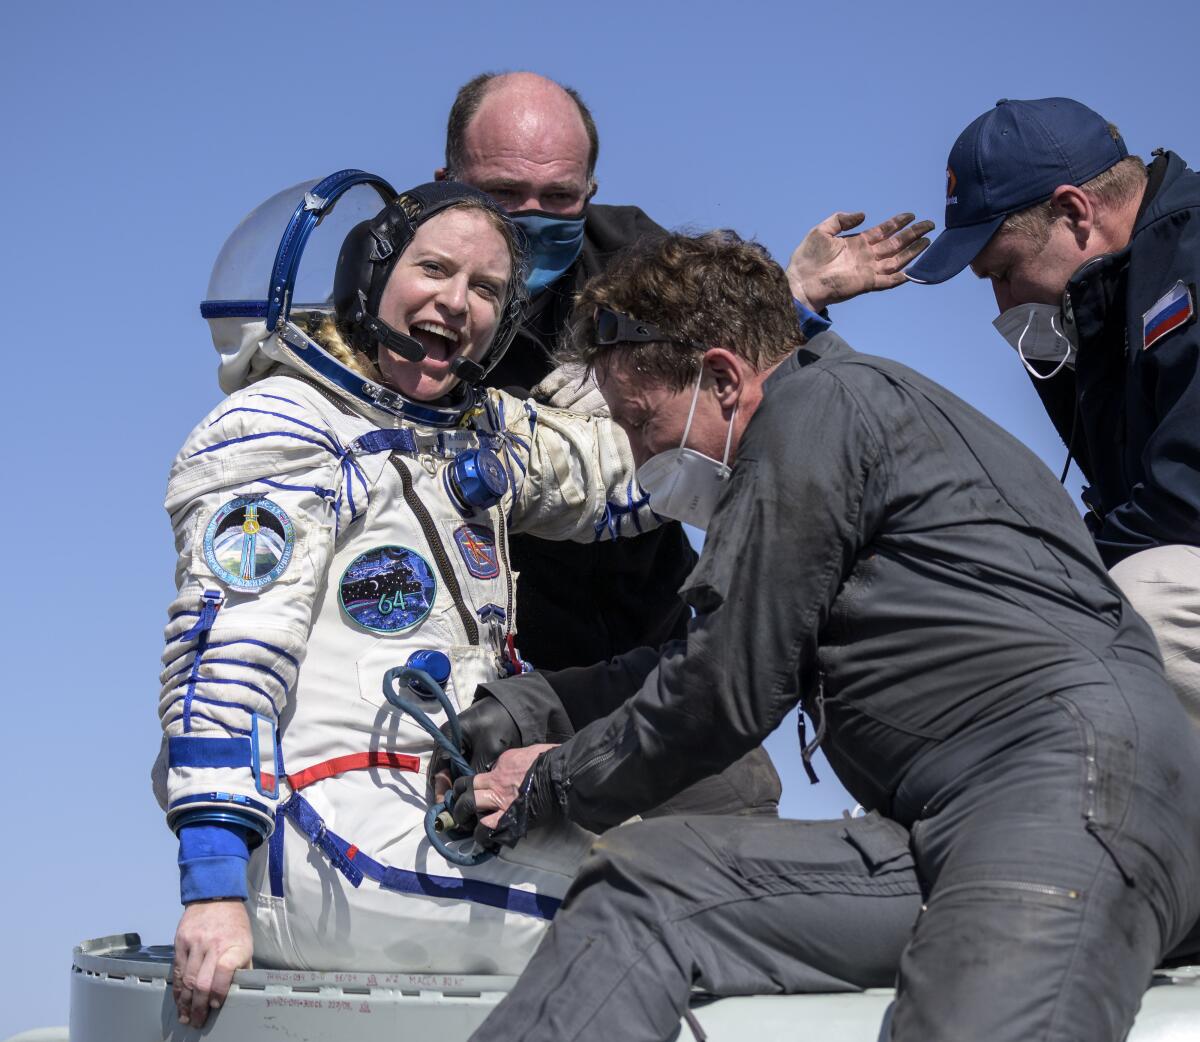 Expedition 64 NASA astronaut Kate Rubins is helped out of the Soyuz MS-17 spacecraft just minutes after she, and Roscosmos cosmonauts Sergey Kud-Sverchkov and Sergey Ryzhikov landed in a remote area near the town of Zhezkazgan, Kazakhstan on Saturday, April 17, 2021. Rubins, Ryzhikov and Kud-Sverchkov returned after 185 days in space having served as Expedition 63-64 crew members onboard the International Space Station. (Bill Ingalls/NASA via AP)